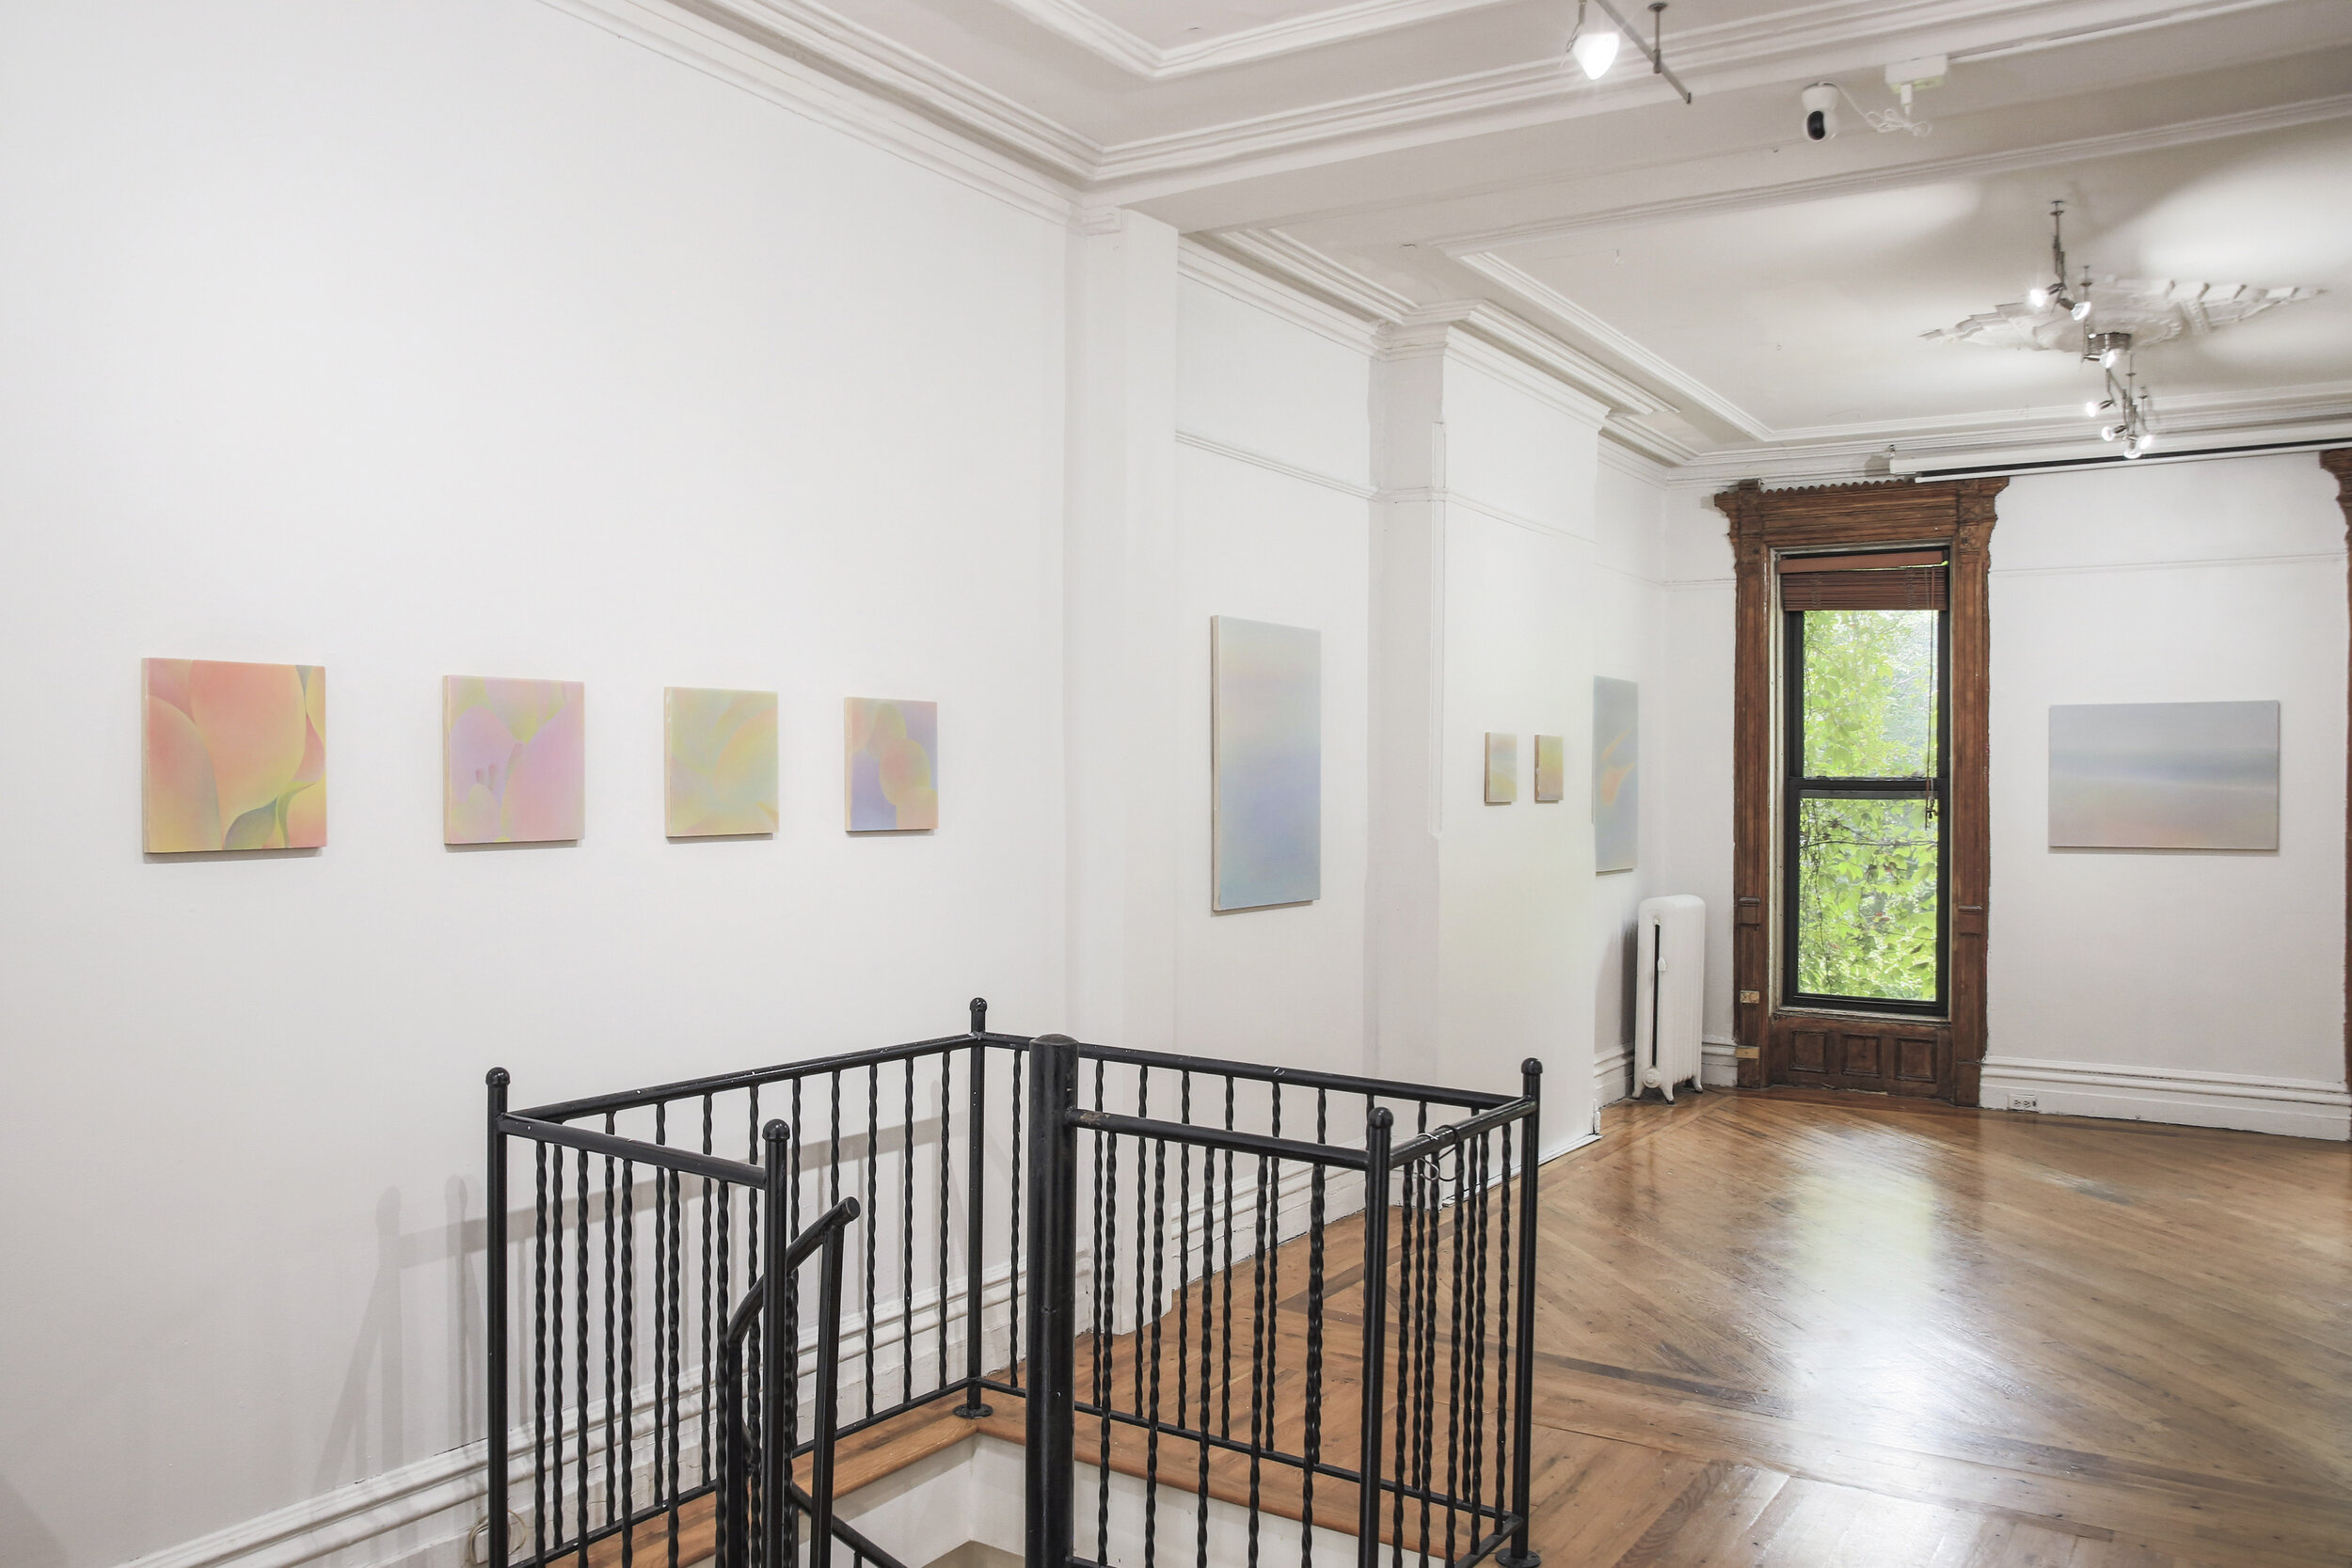   Shuling Guo: 5—6 pm  installation view. Photography by Lynn Hai ©Shuling Guo, courtesy Fou Gallery 